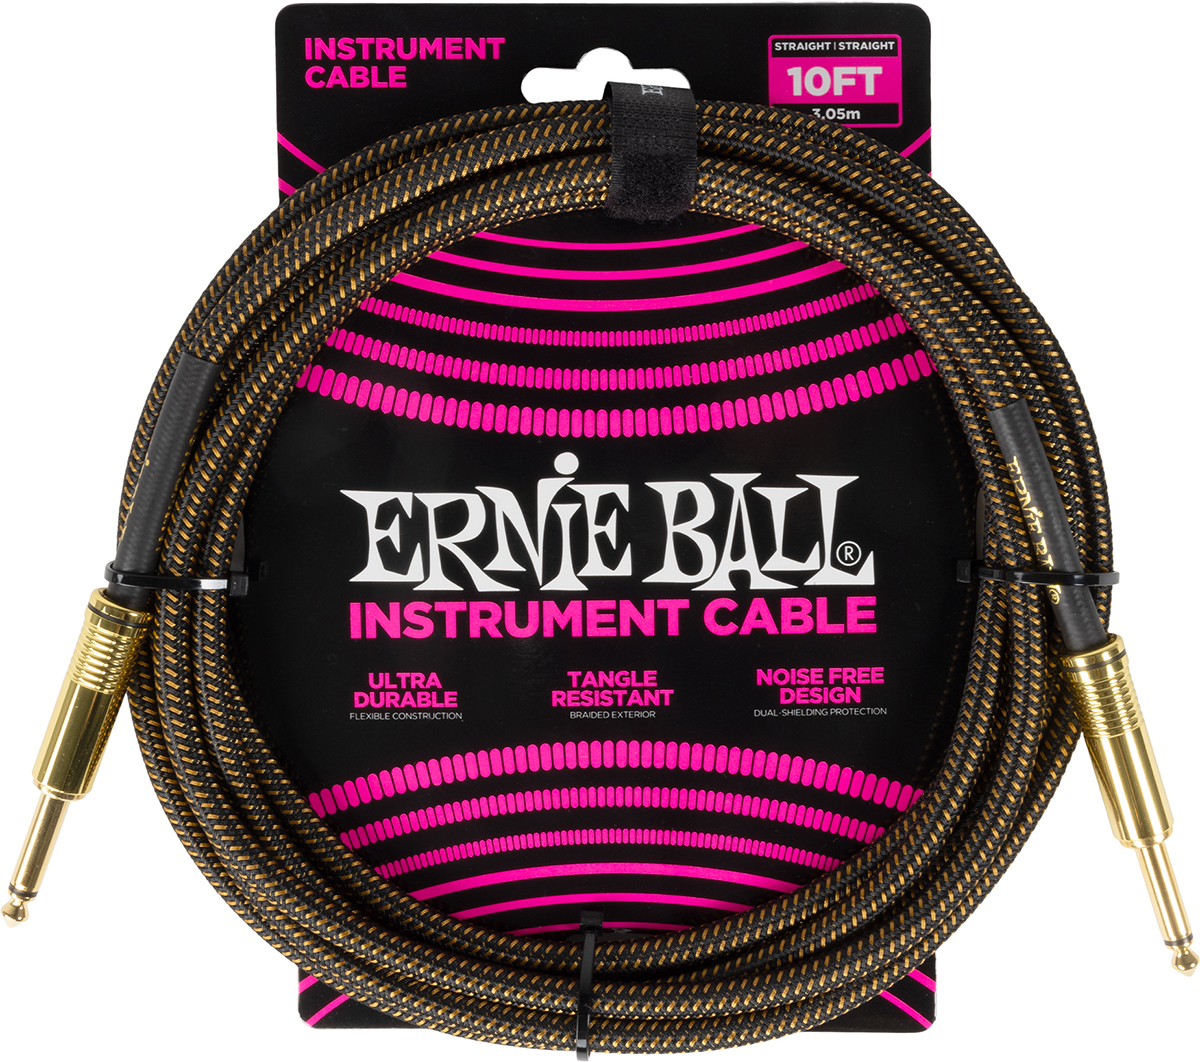 ERNIE Ball #6428 Braided Instrument Cable Straight/Straight 10ft - Pay